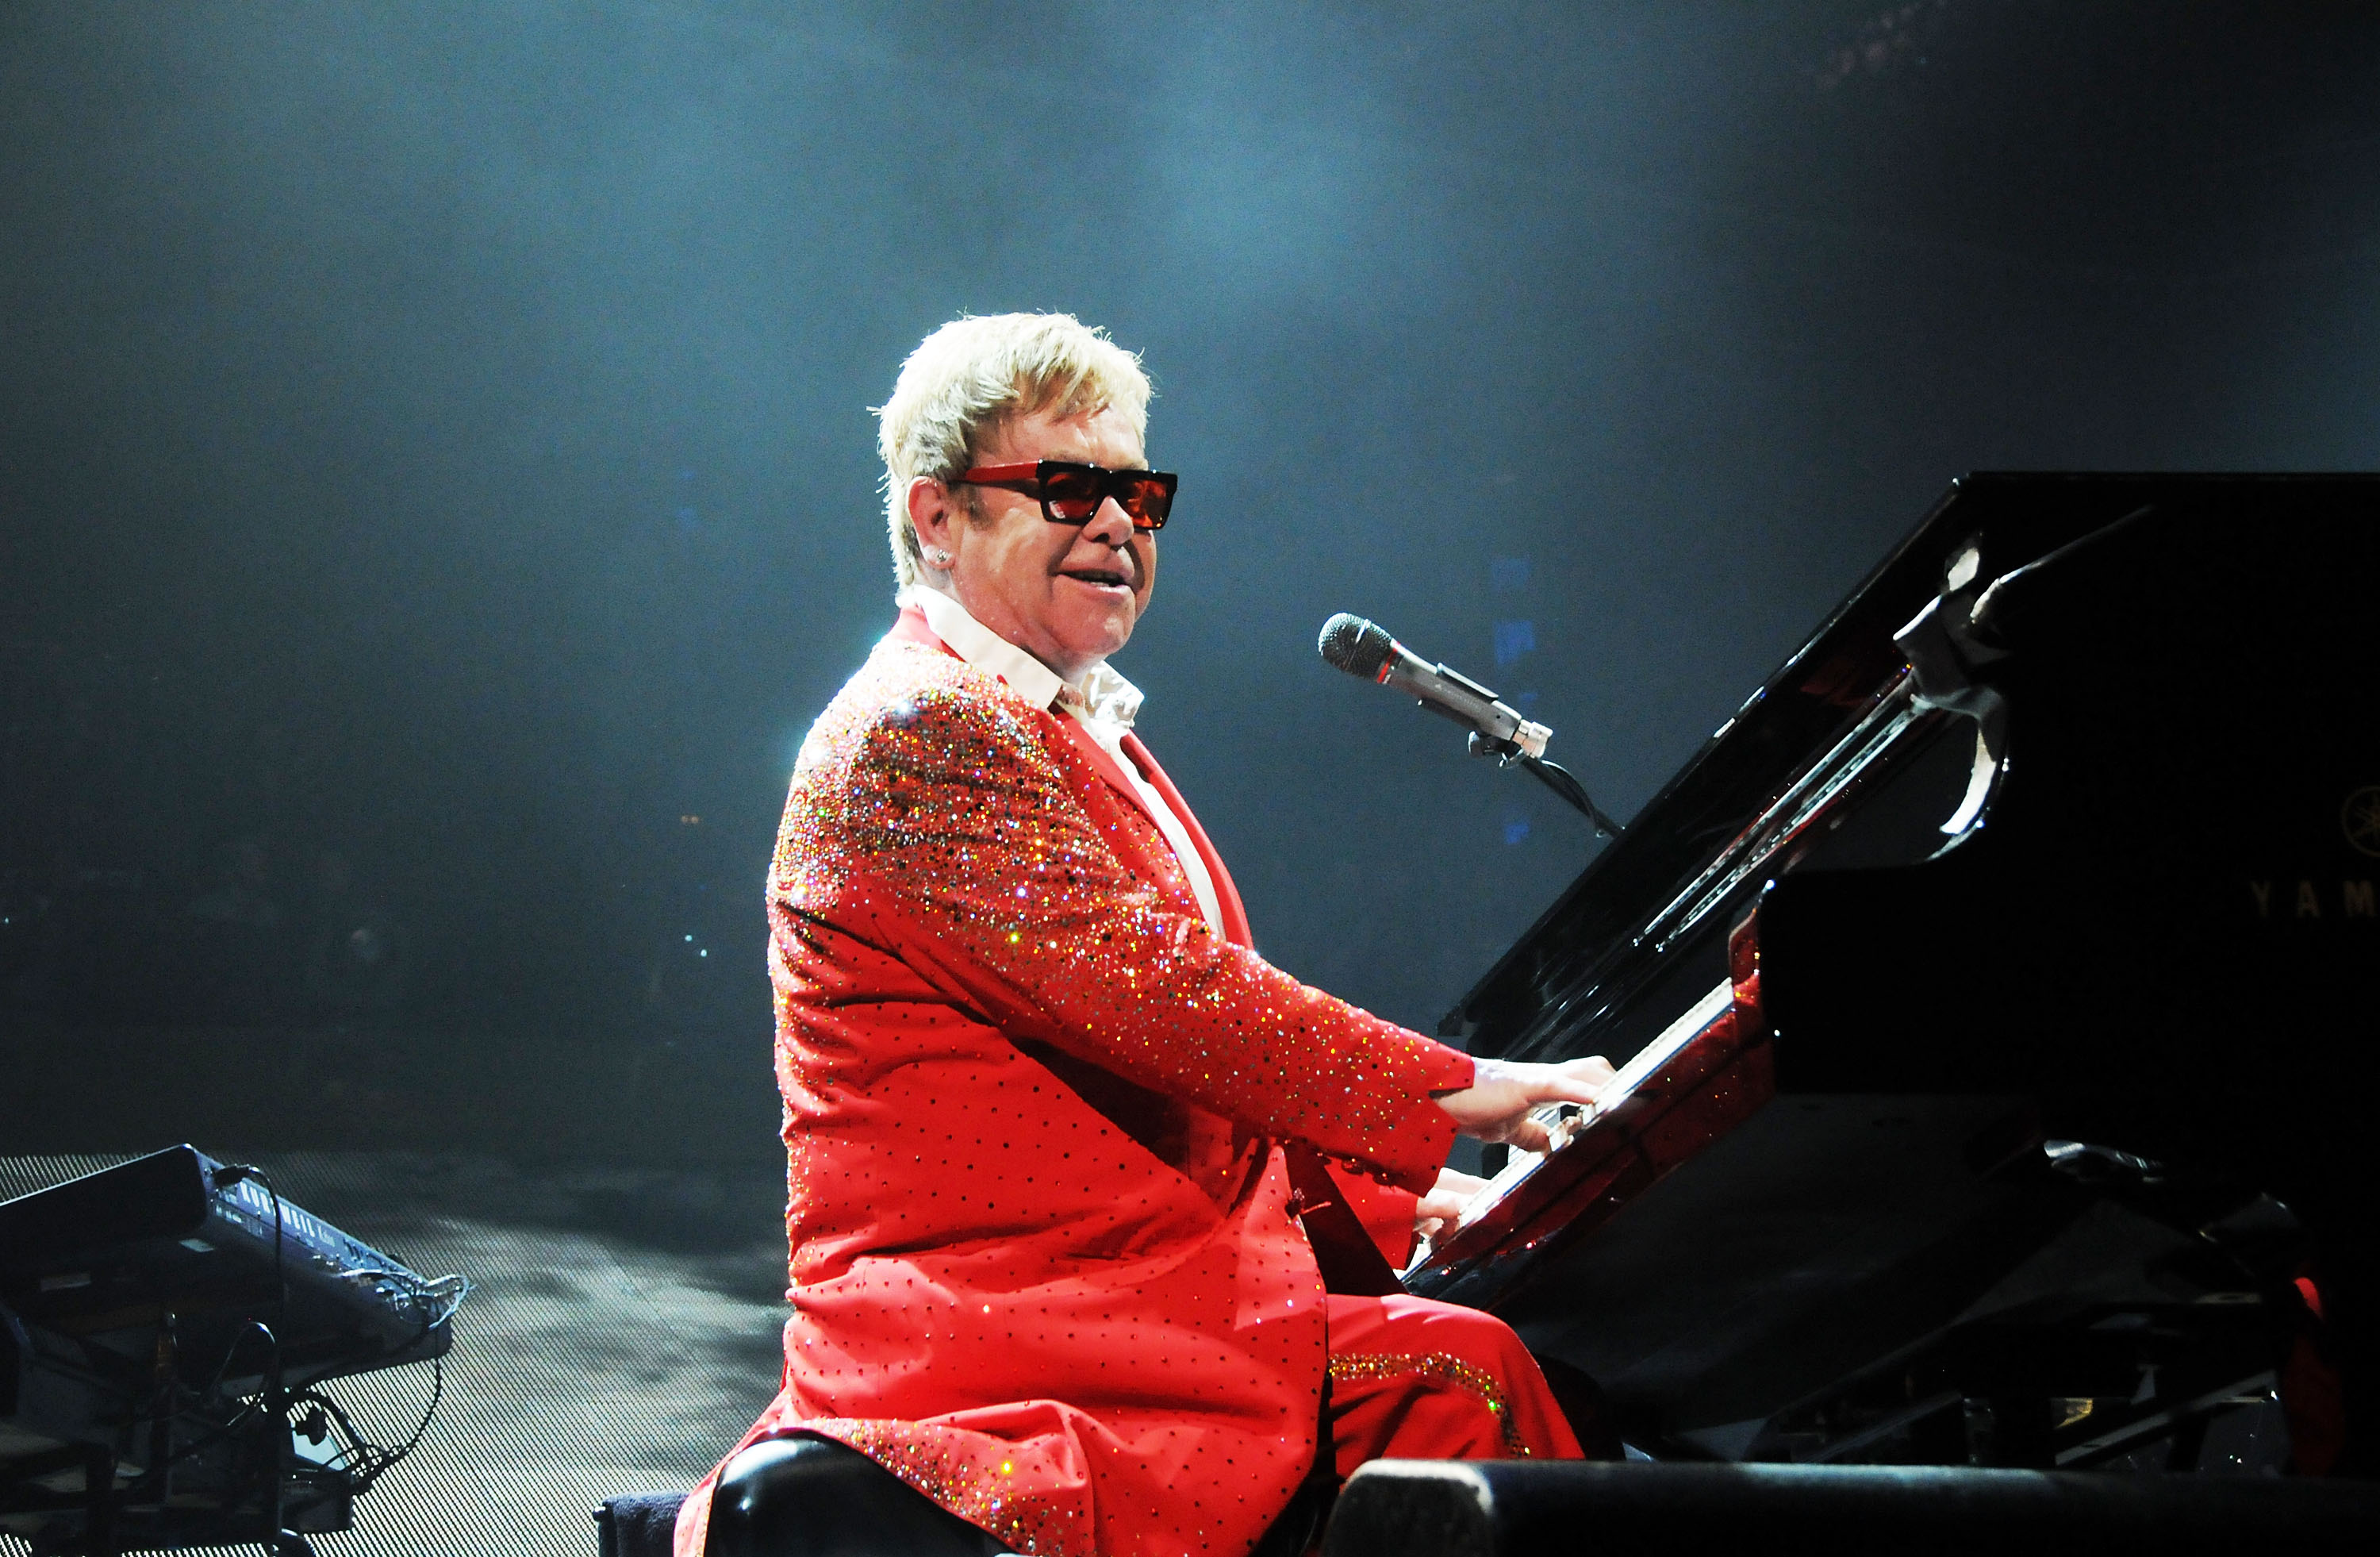 Musician Elton John performs at the Barclays Center on December 31, 2014 in the Brooklyn borough of New York City. (Desiree Navarro—WireImage)